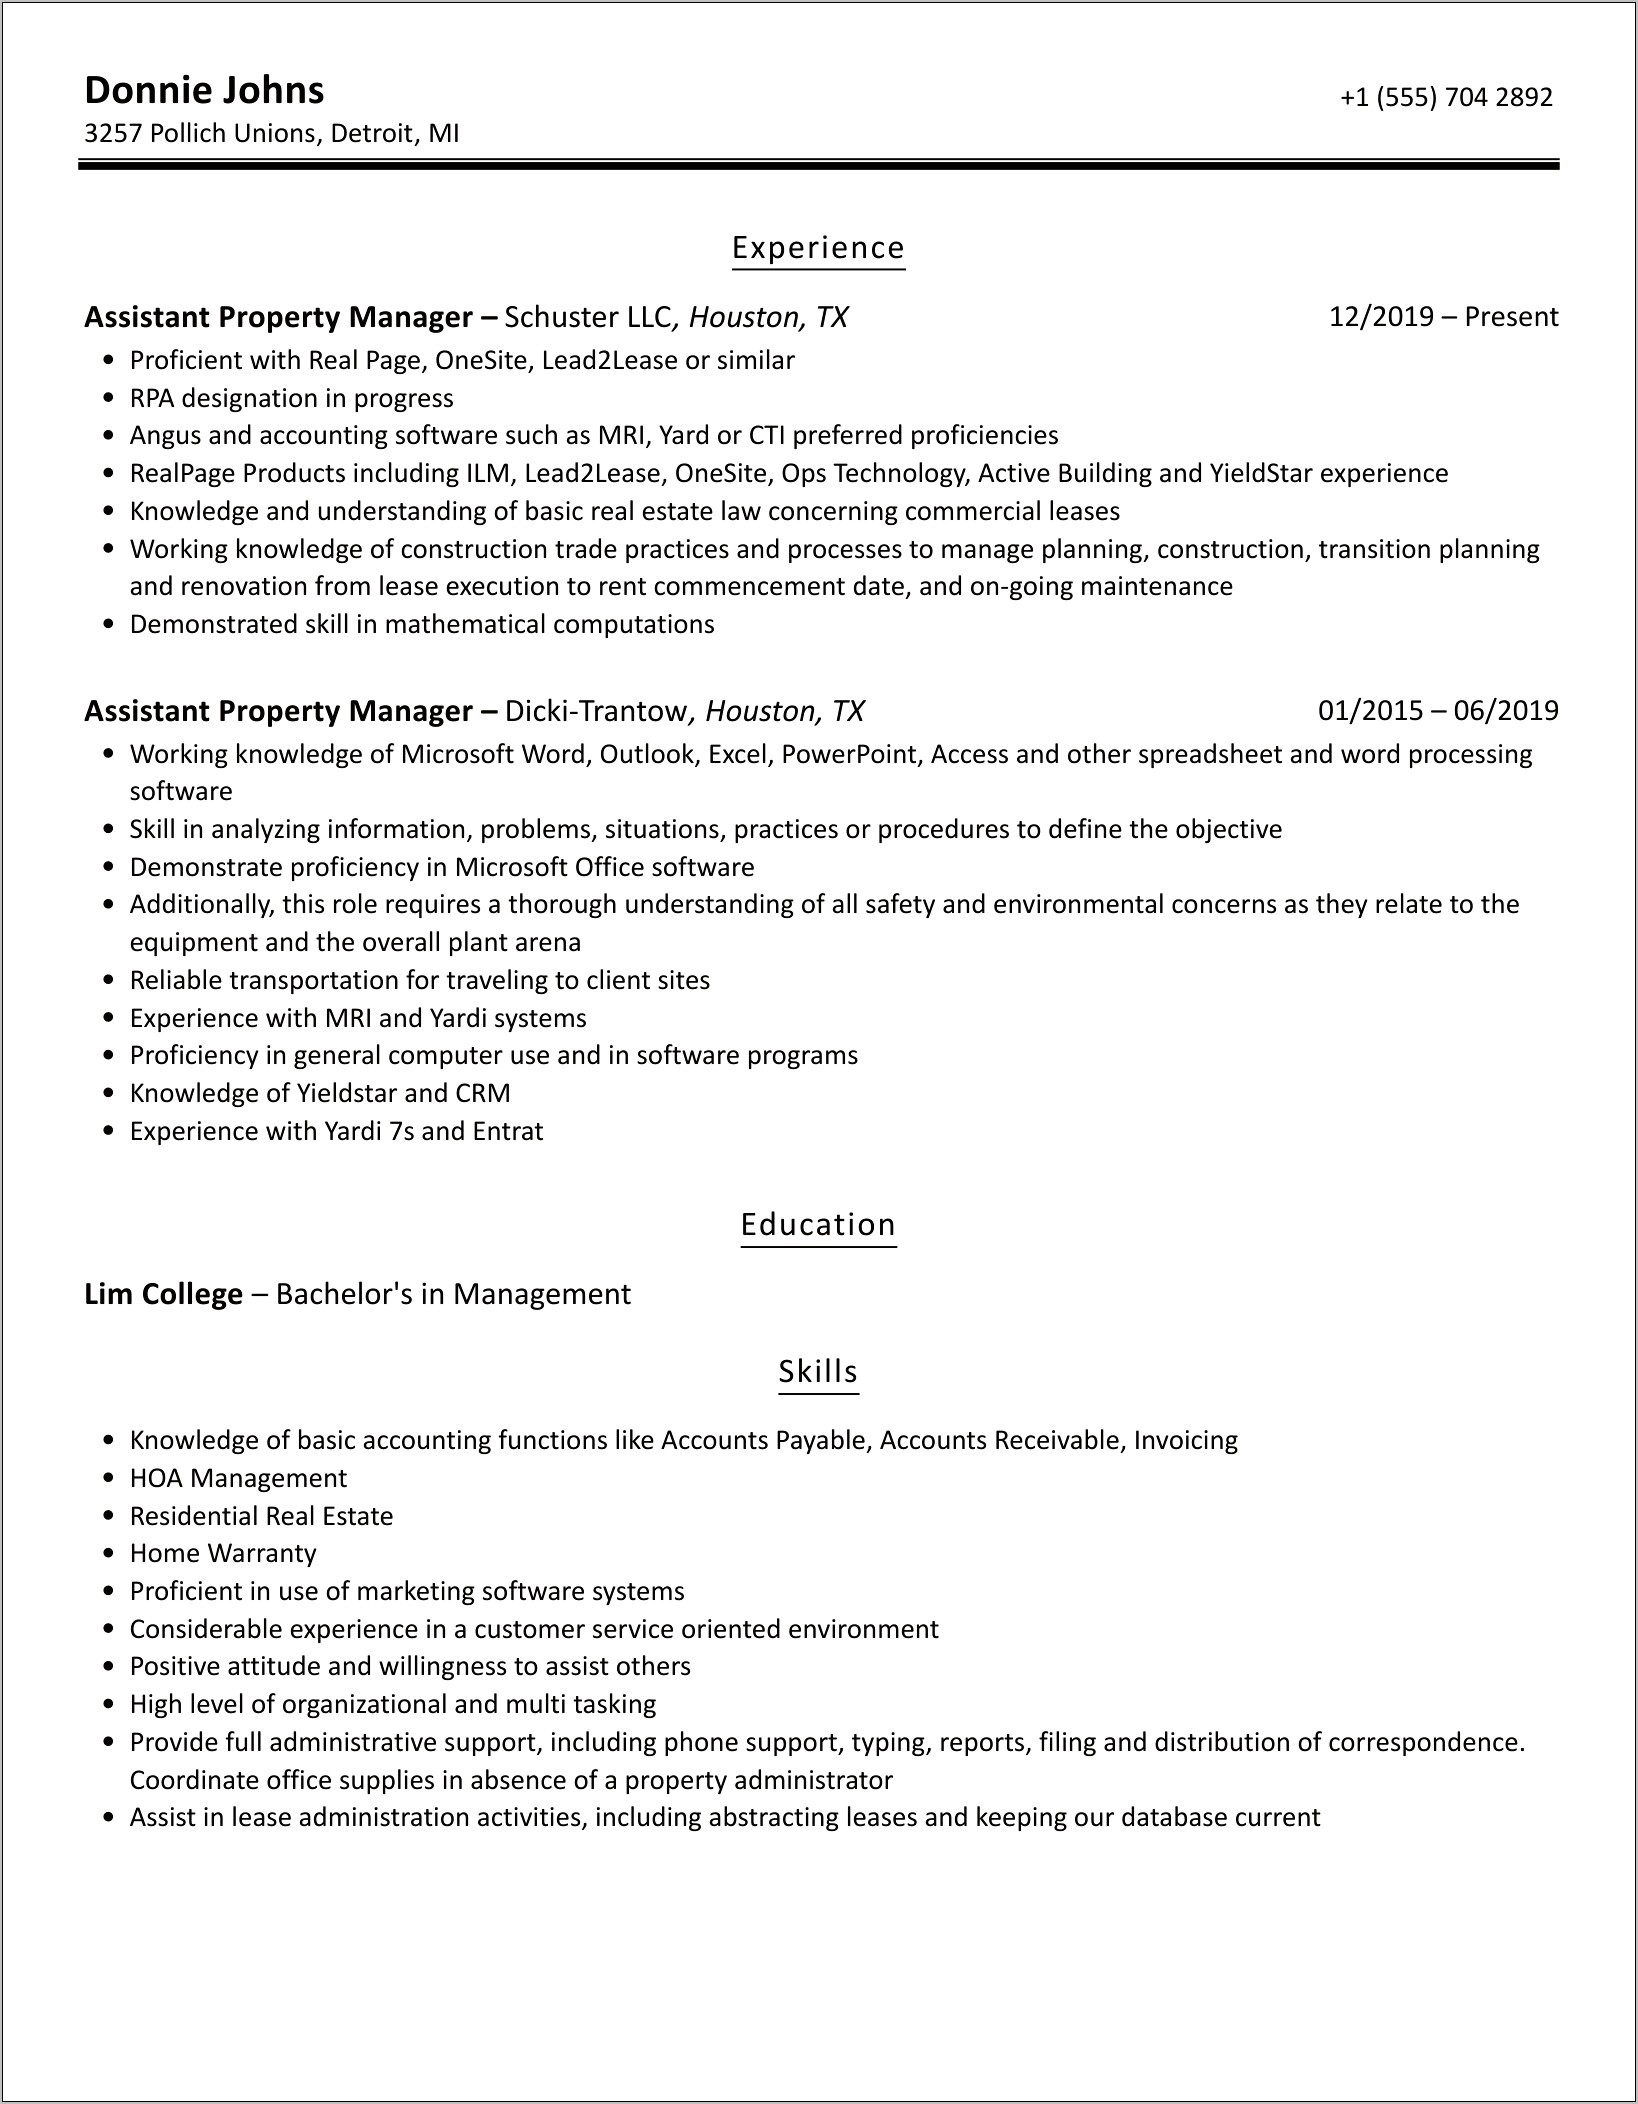 Assistant Property Manager Resume Objective